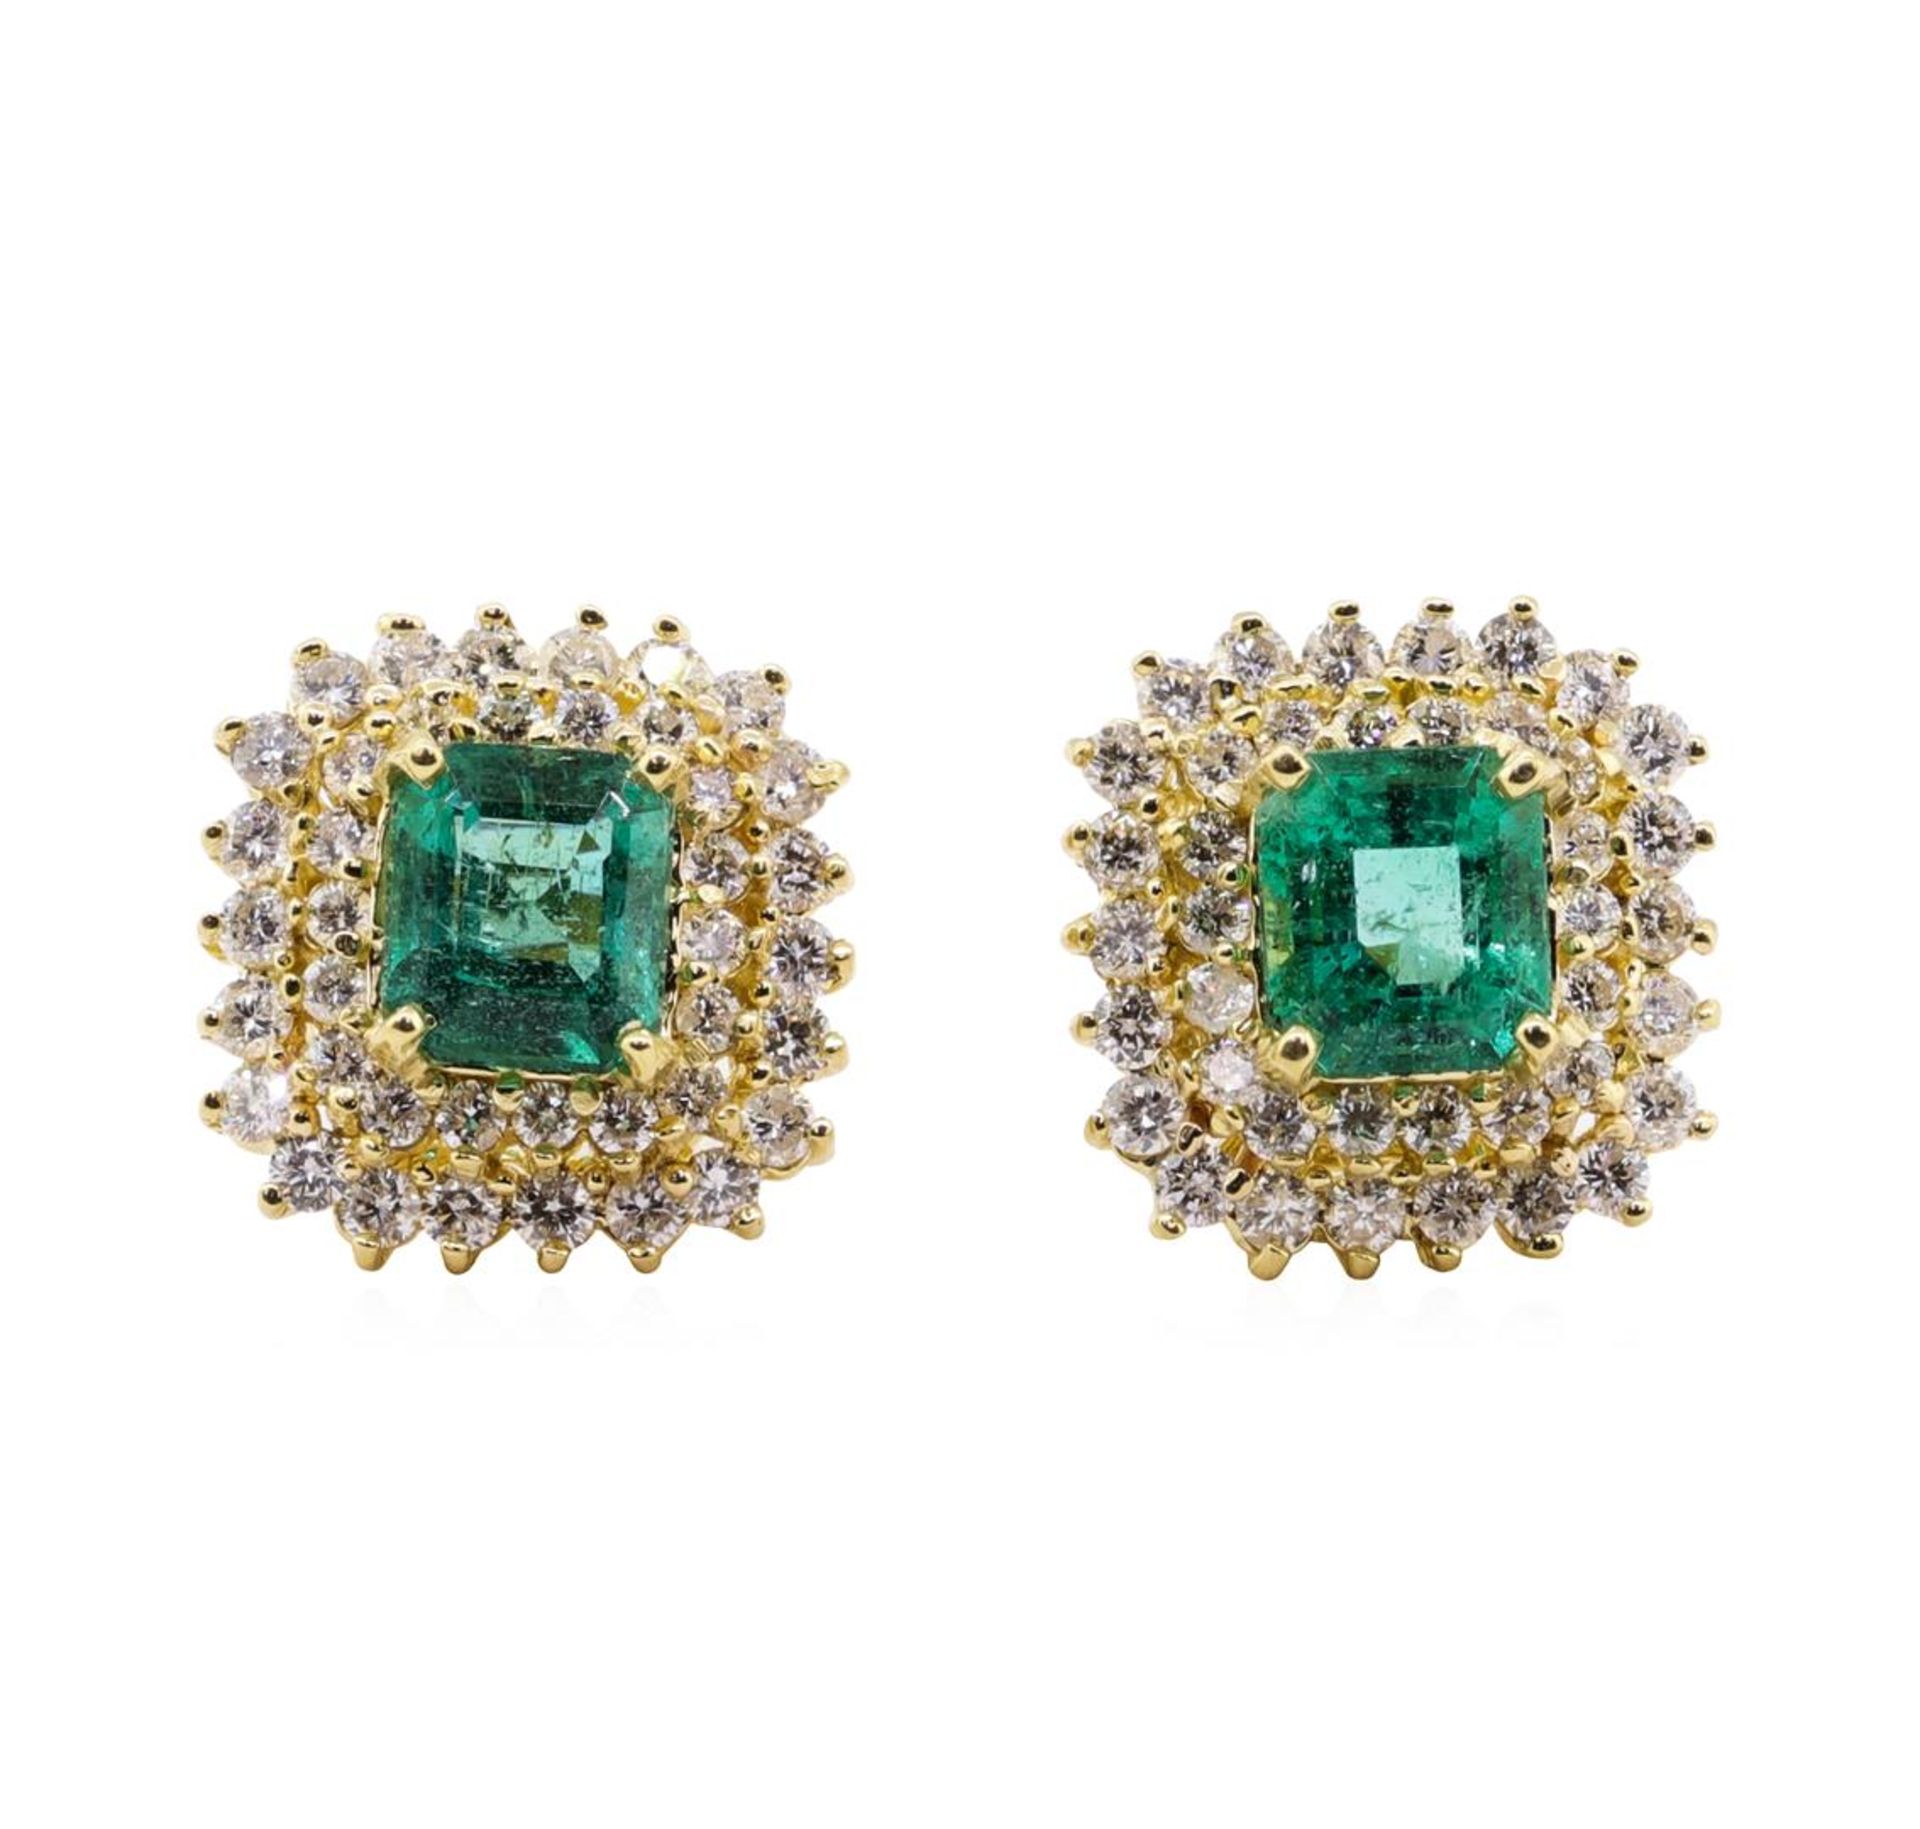 3.71 ctw Emerald and Diamond Earrings - 18KT Yellow Gold